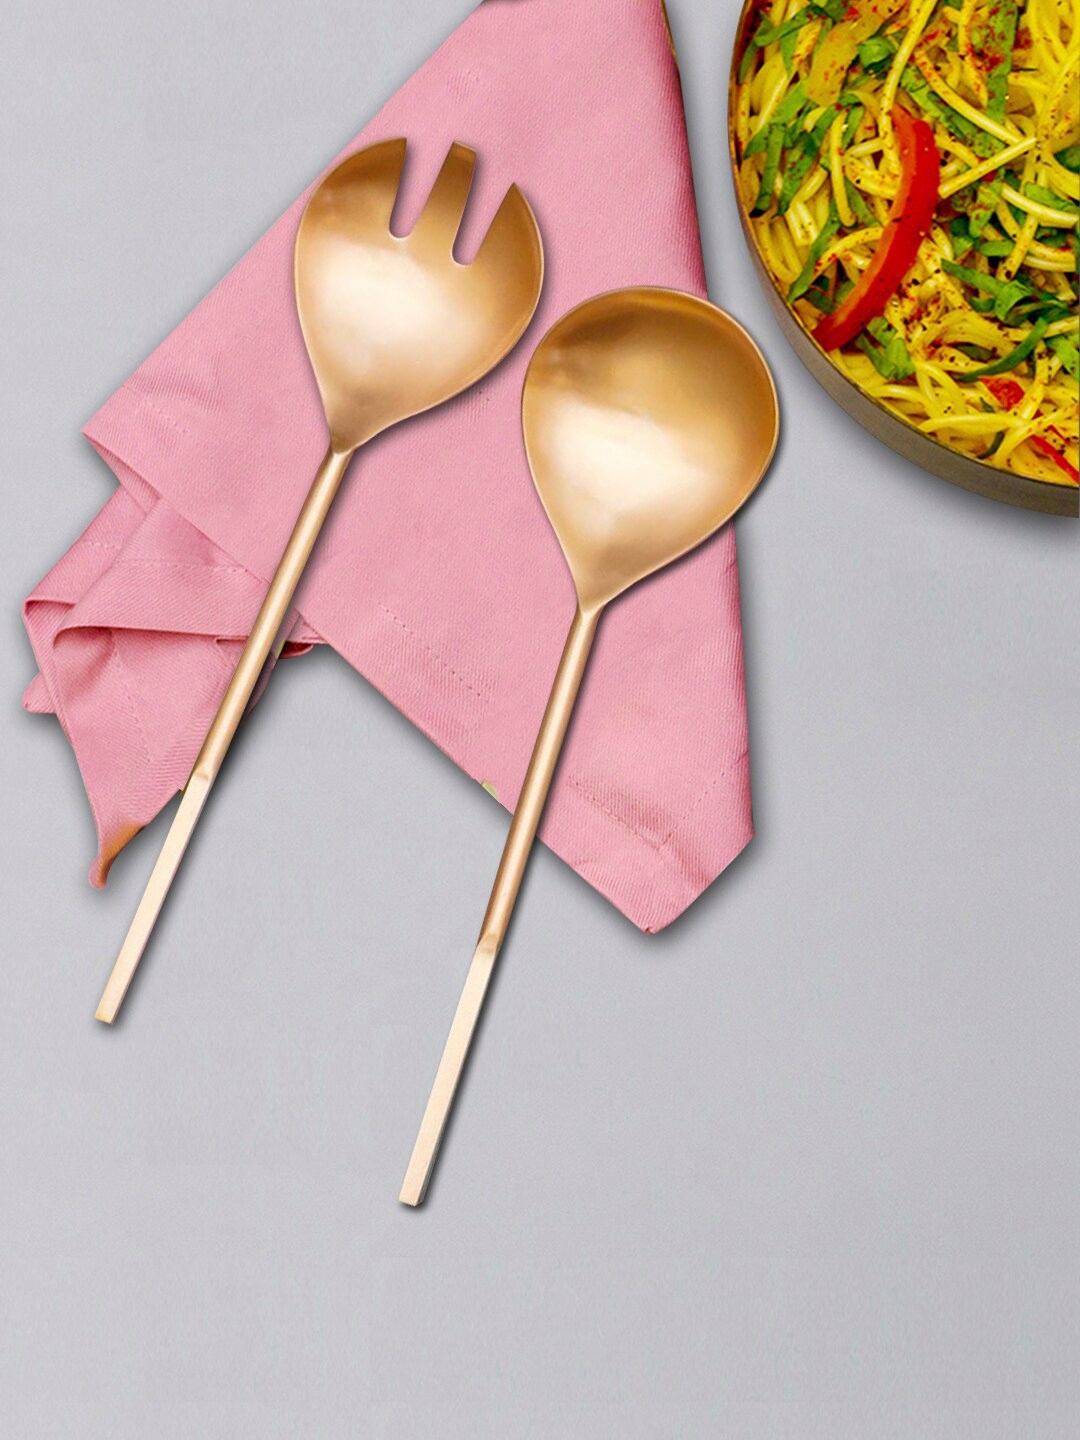 nestroots Gold Toned 2 Pcs Solid Stainless Steel Cutlery Set